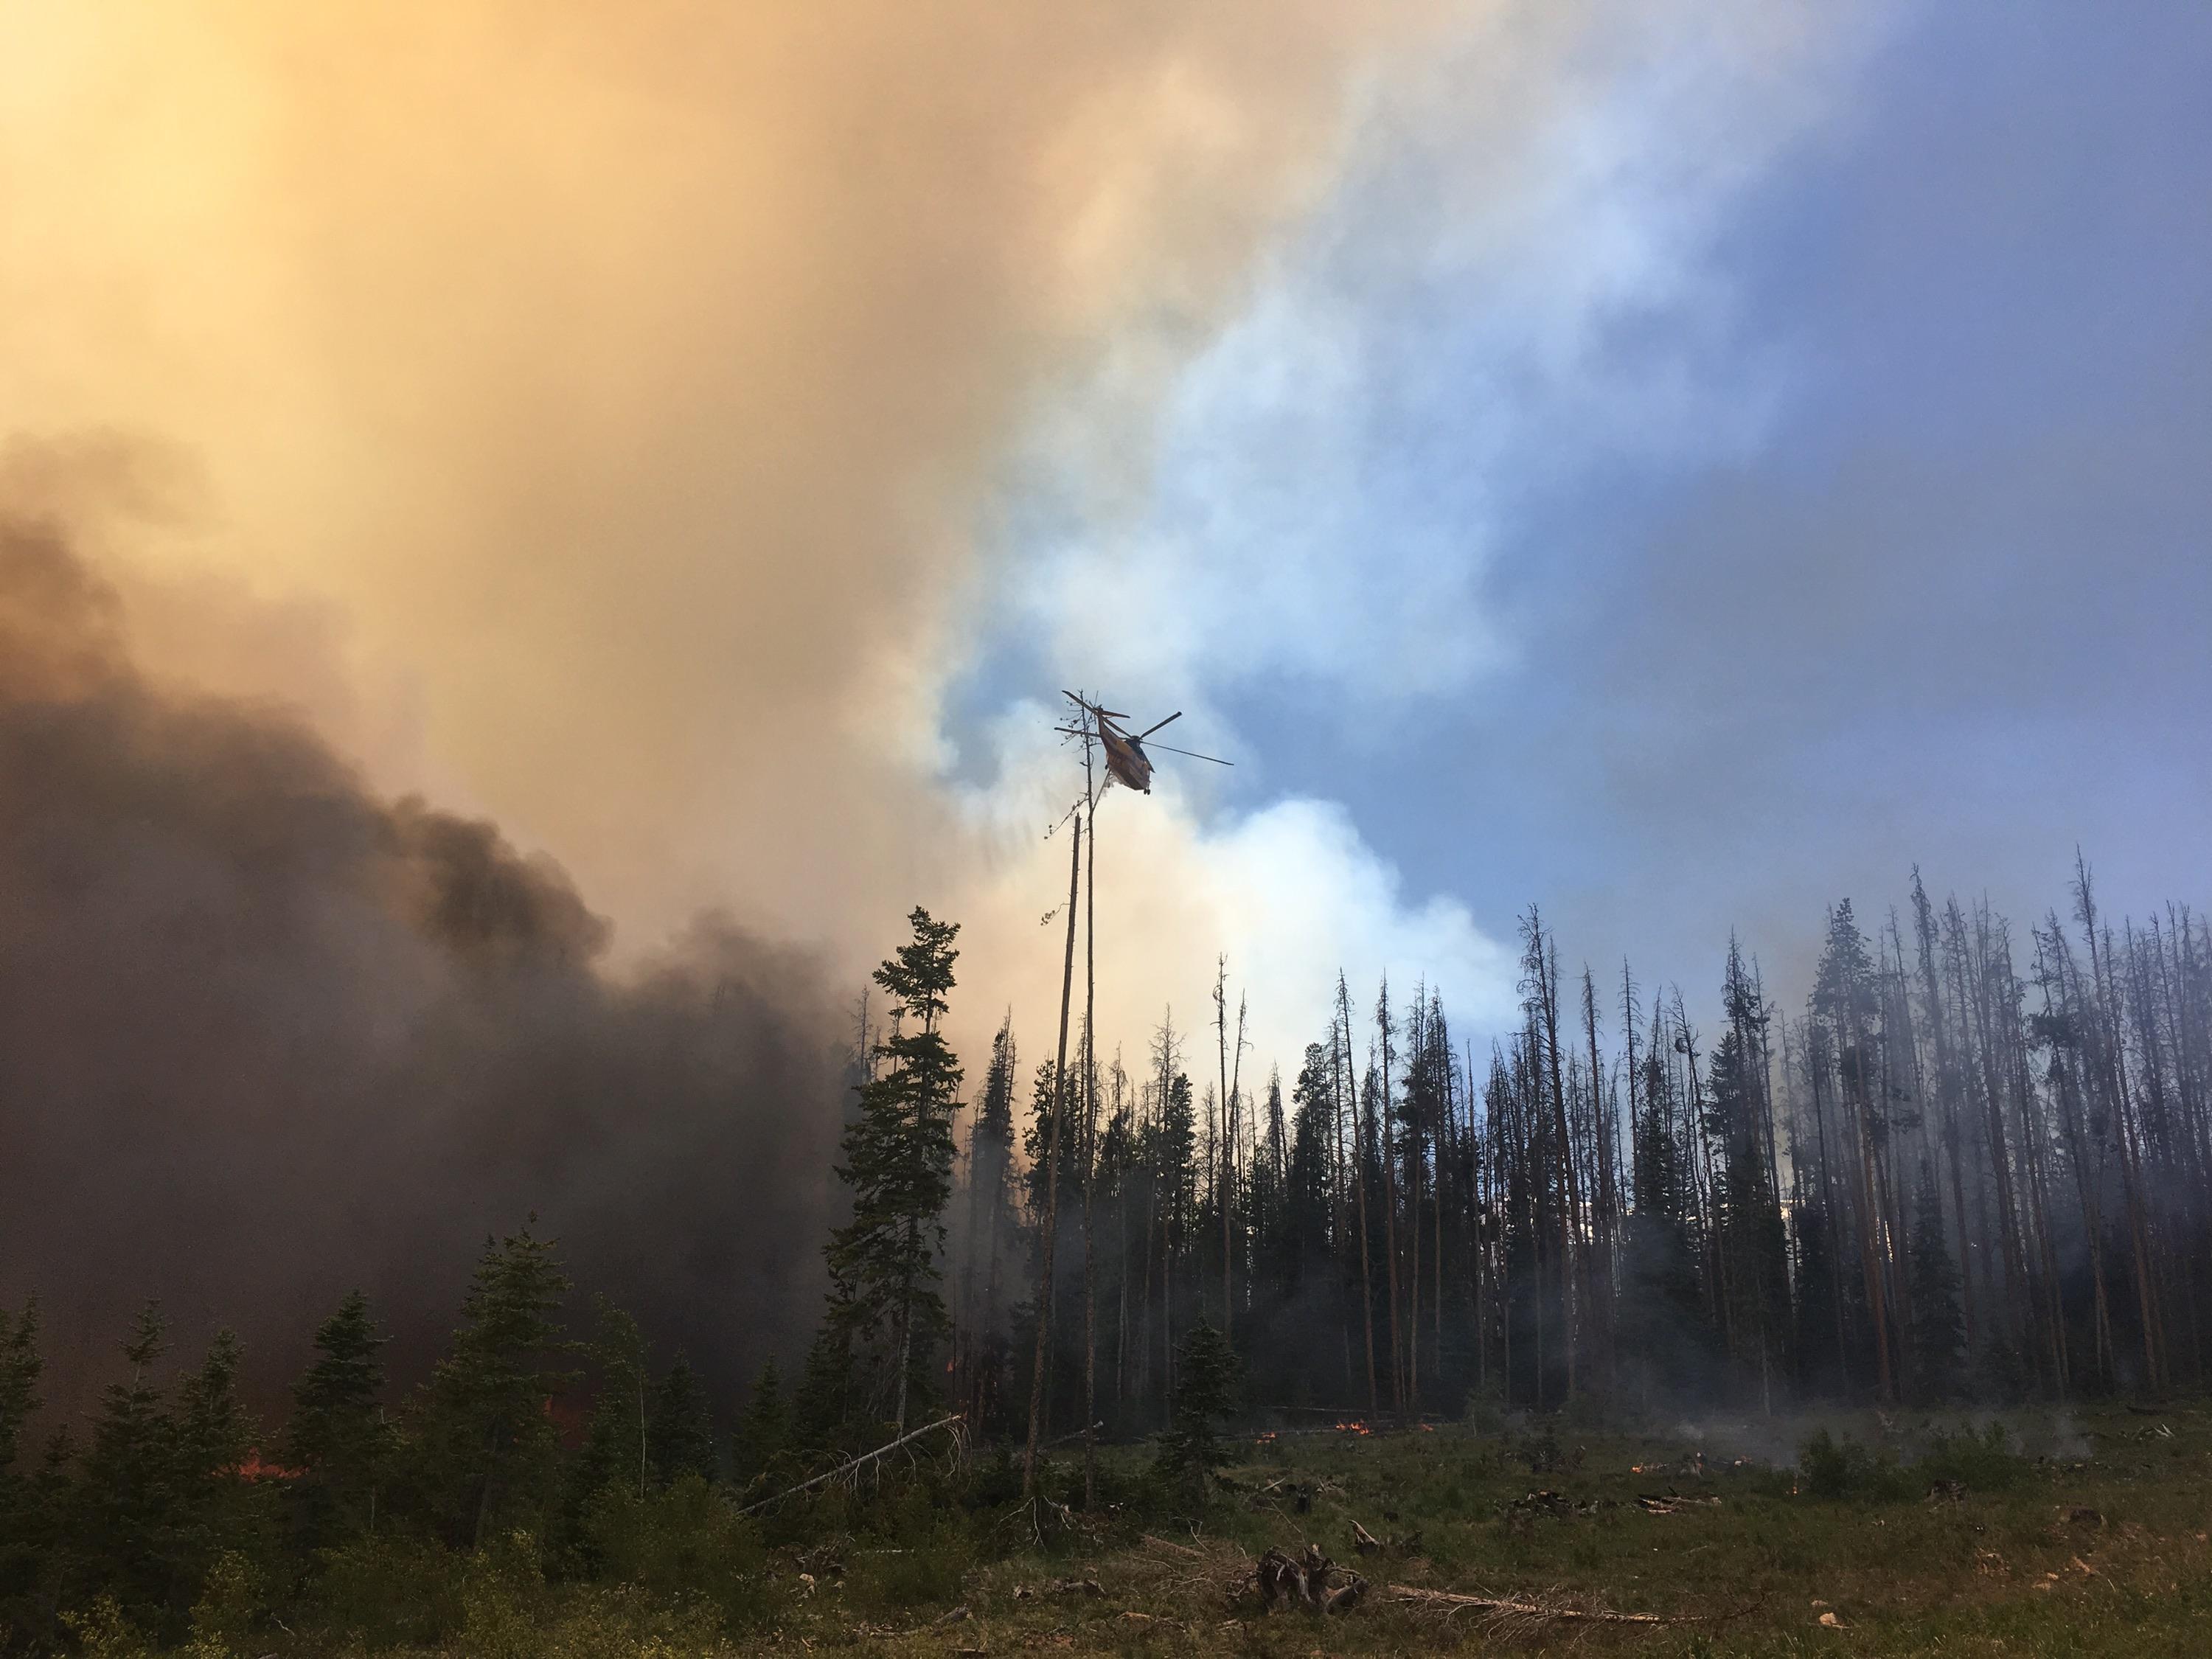 The Buffalo Fire burned 73 acres near Silverthorne, Colorado in June 2018. Credit: USDA Forest Service.